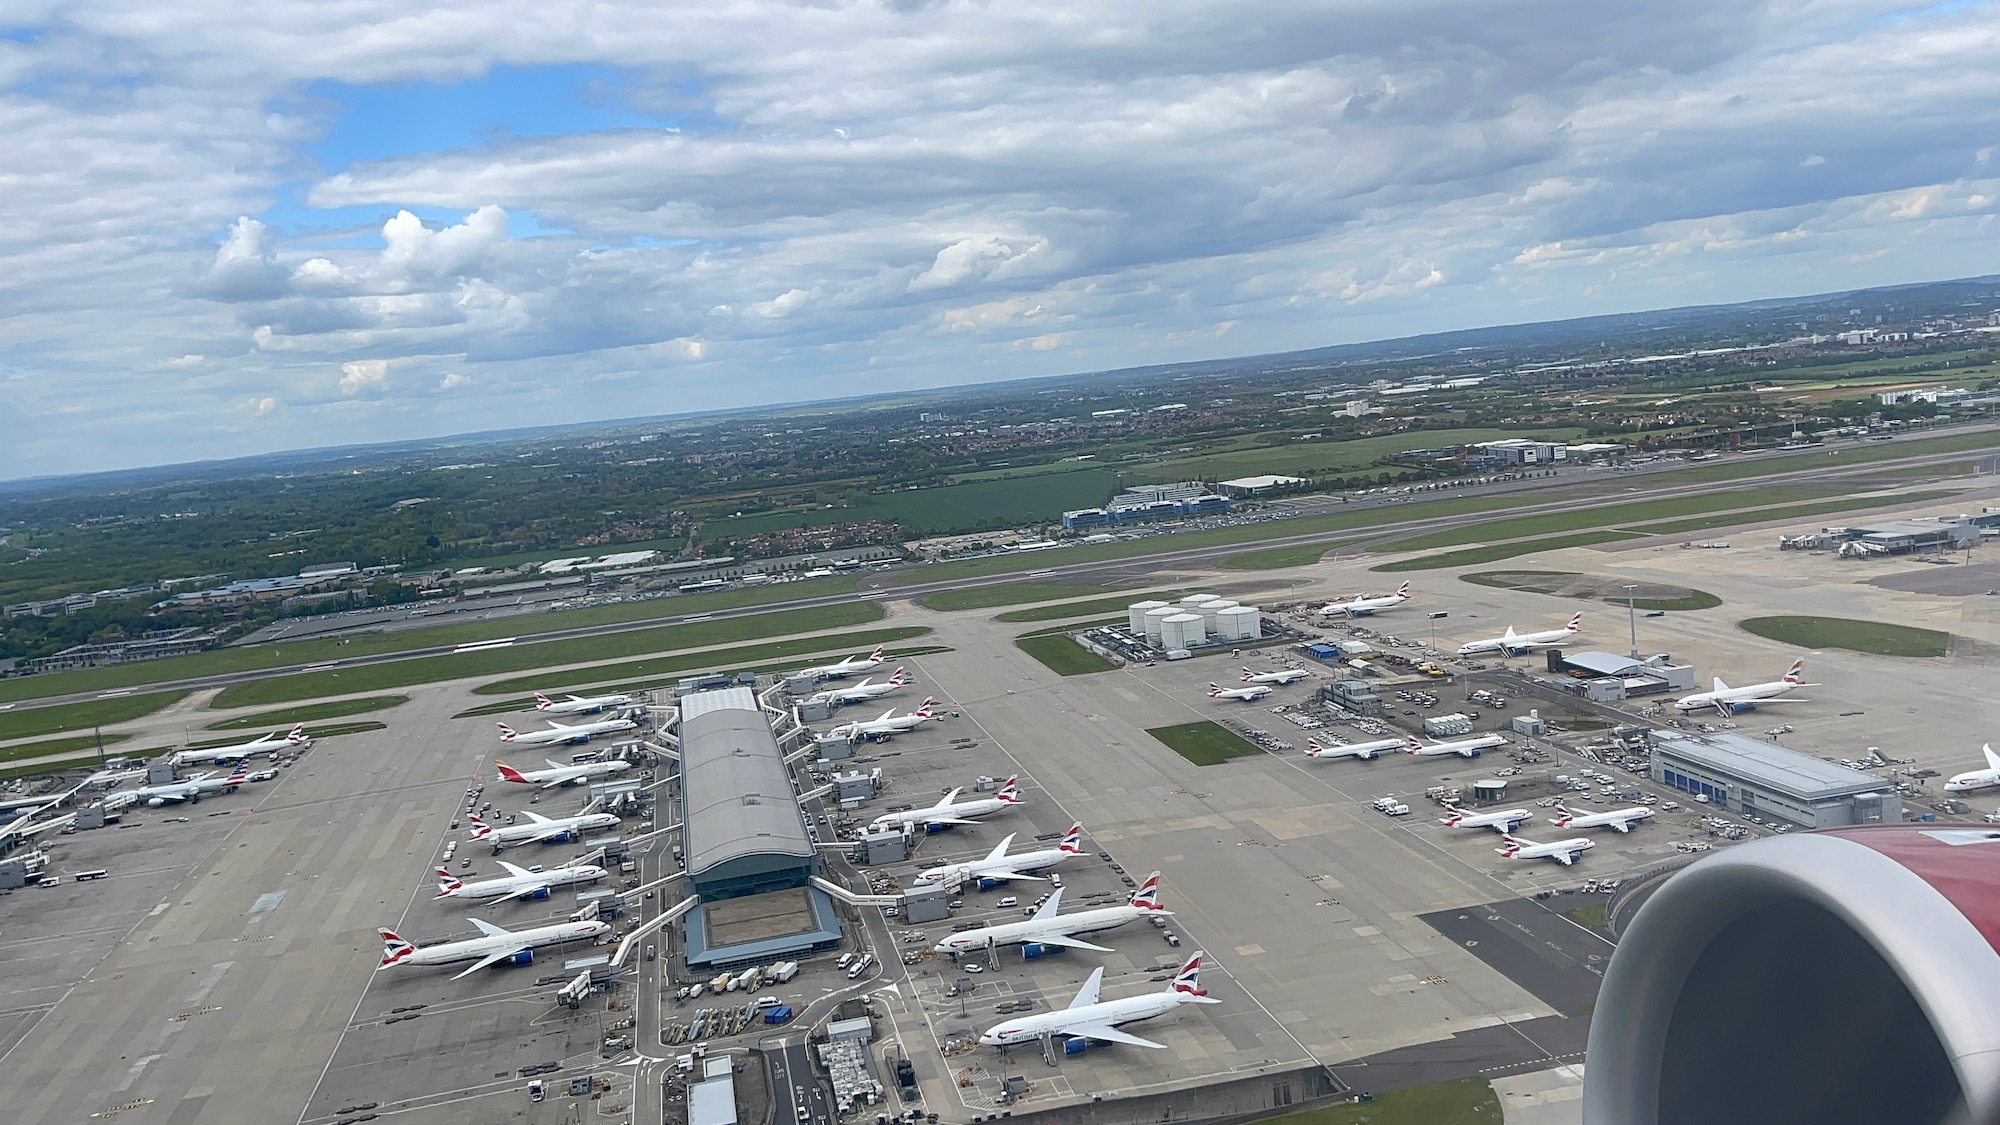 an aerial view of an airport with airplanes parked on the ground